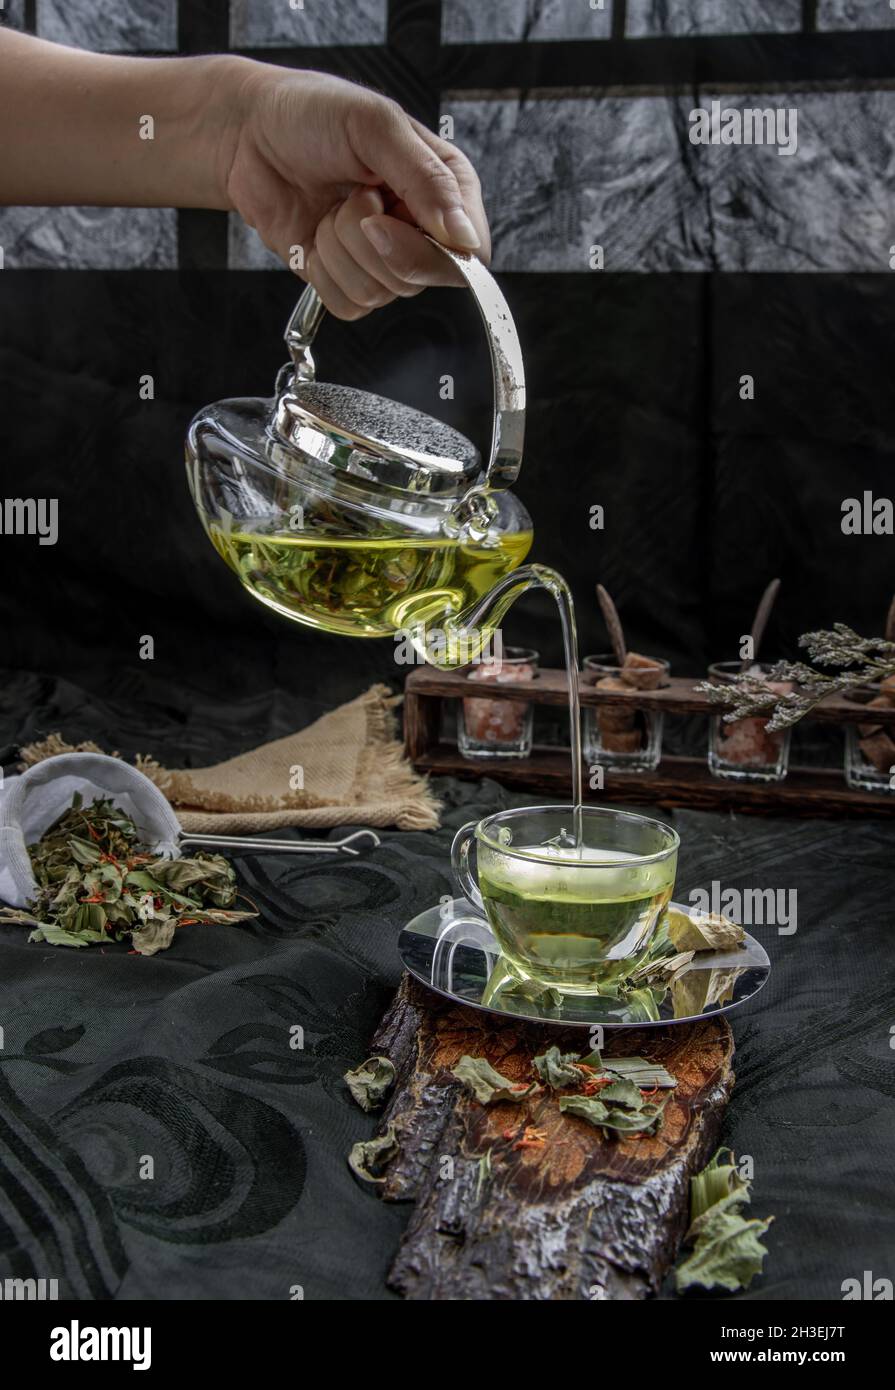 A Hot pandan leaf tea with indian marsh fleabane plant leaves and Safflower dried (Saffron substitute) is poured from the glass teapot into a glass wi Stock Photo